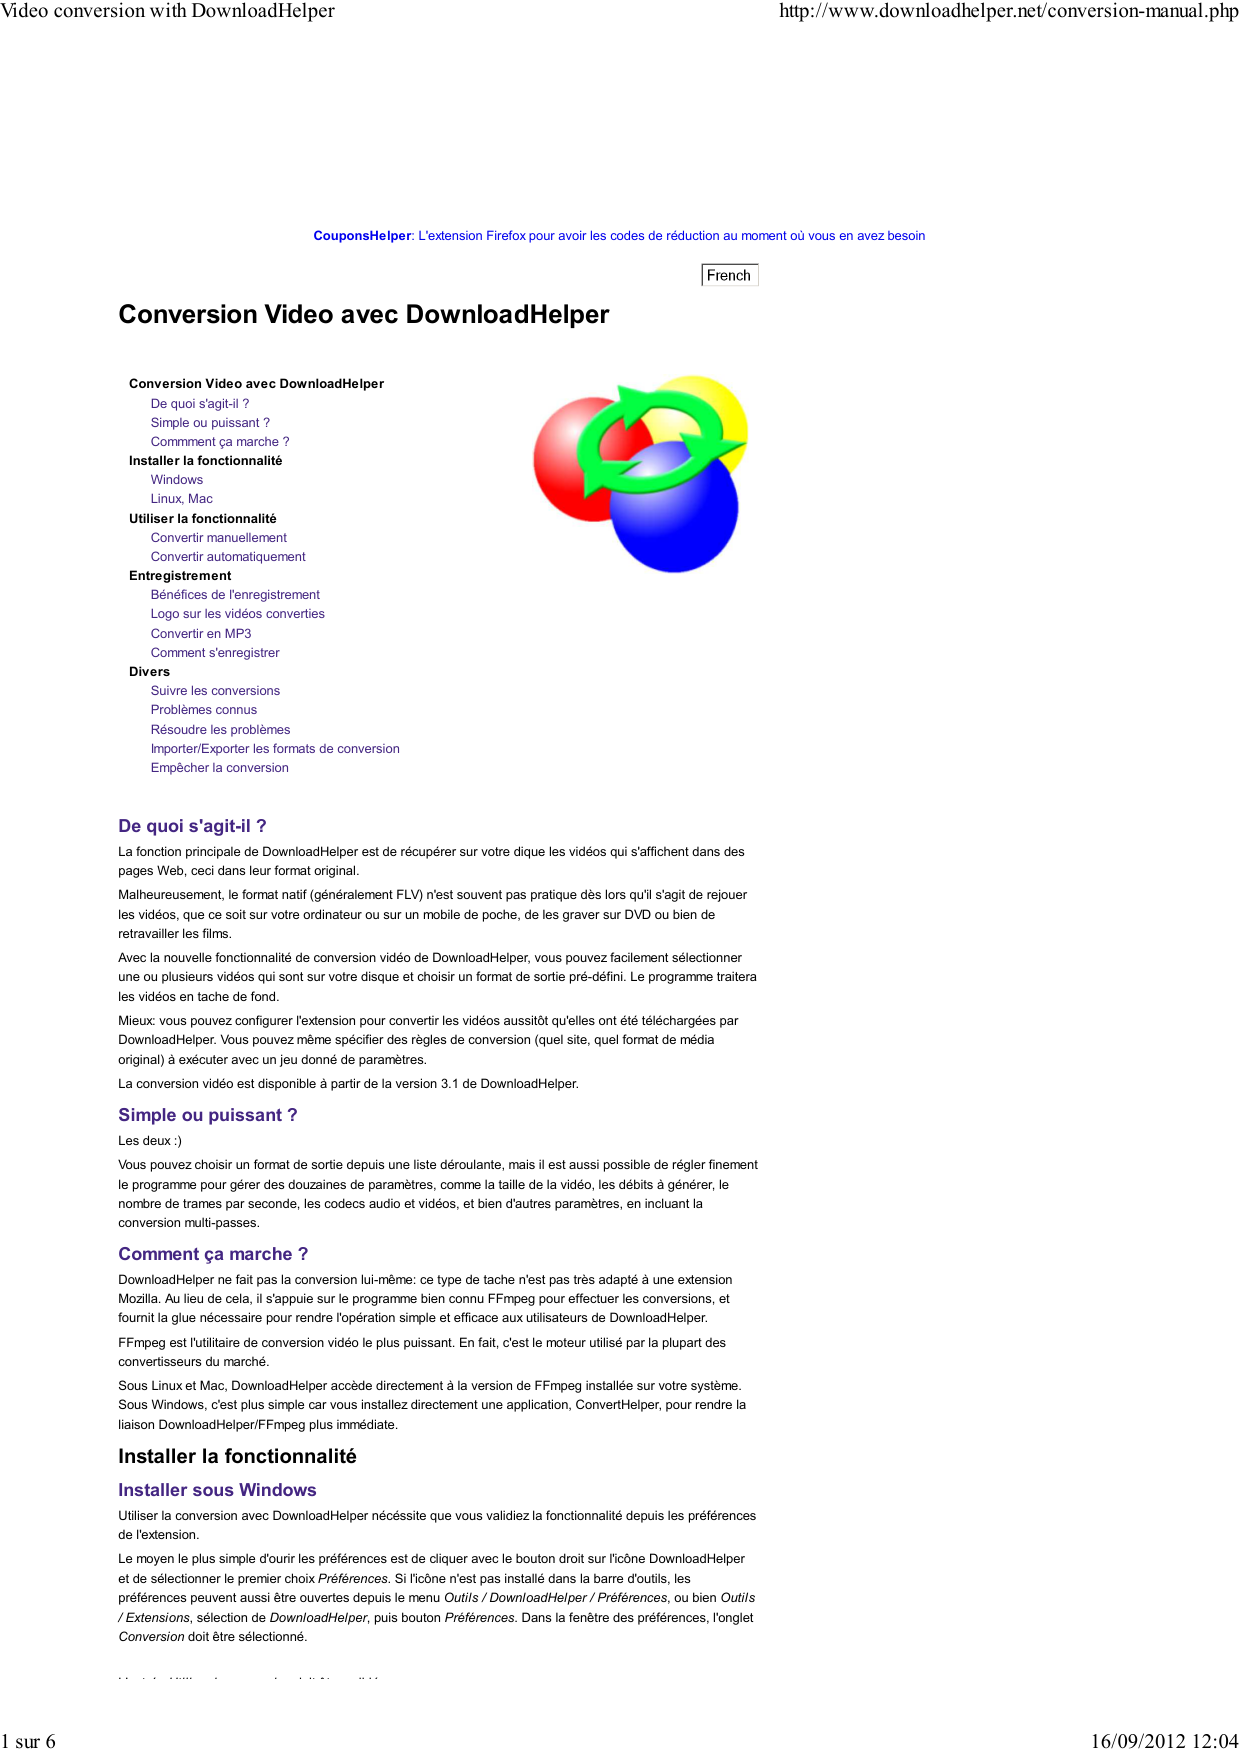 what is converthelper 3.1.1